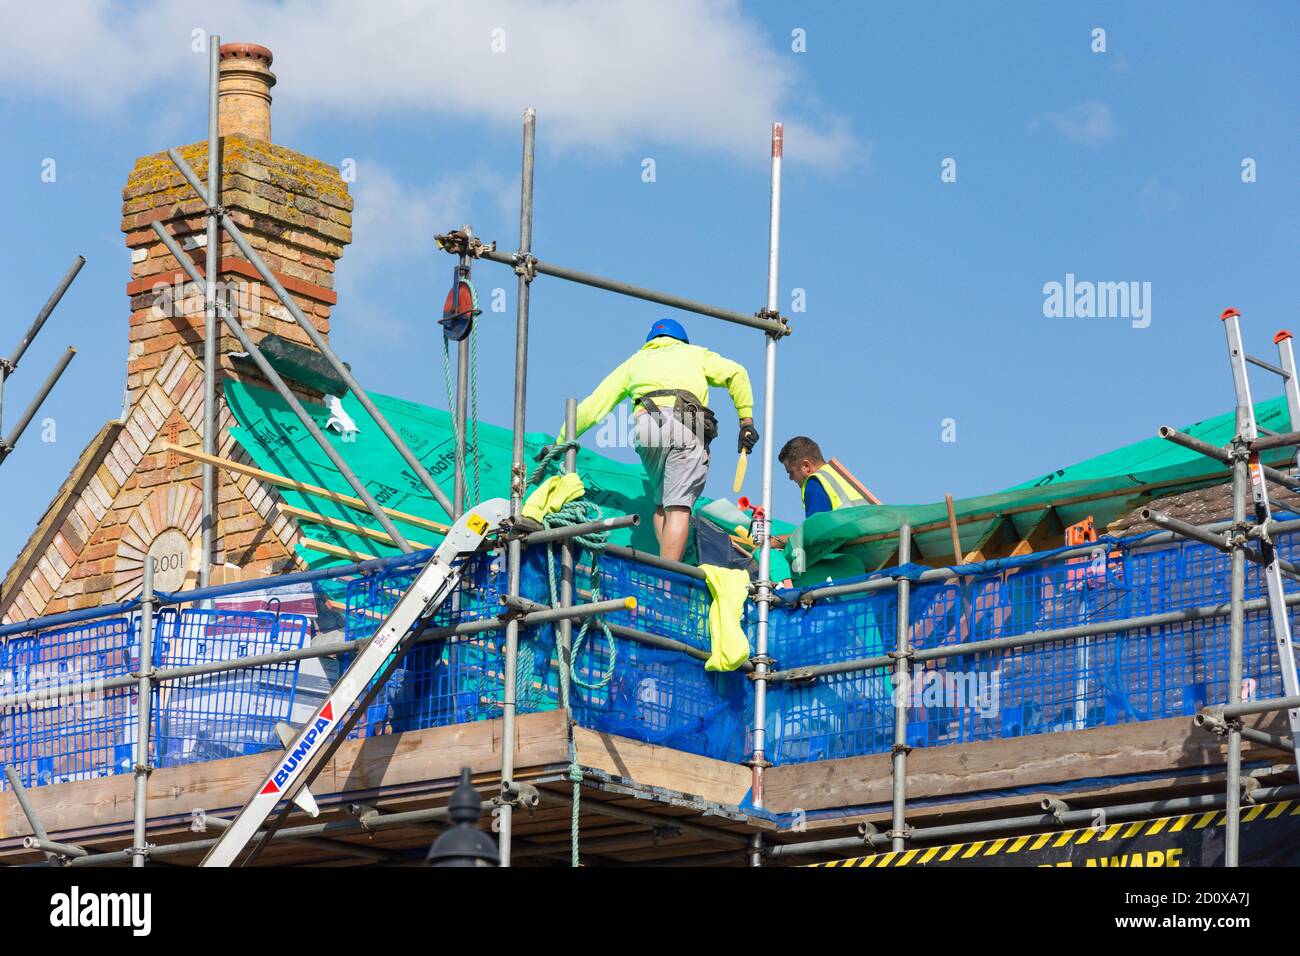 Re-roofing works under the Heathrow Protection Scheme, Stanwell Moor, Surrey, England, United Kingdom Stock Photo